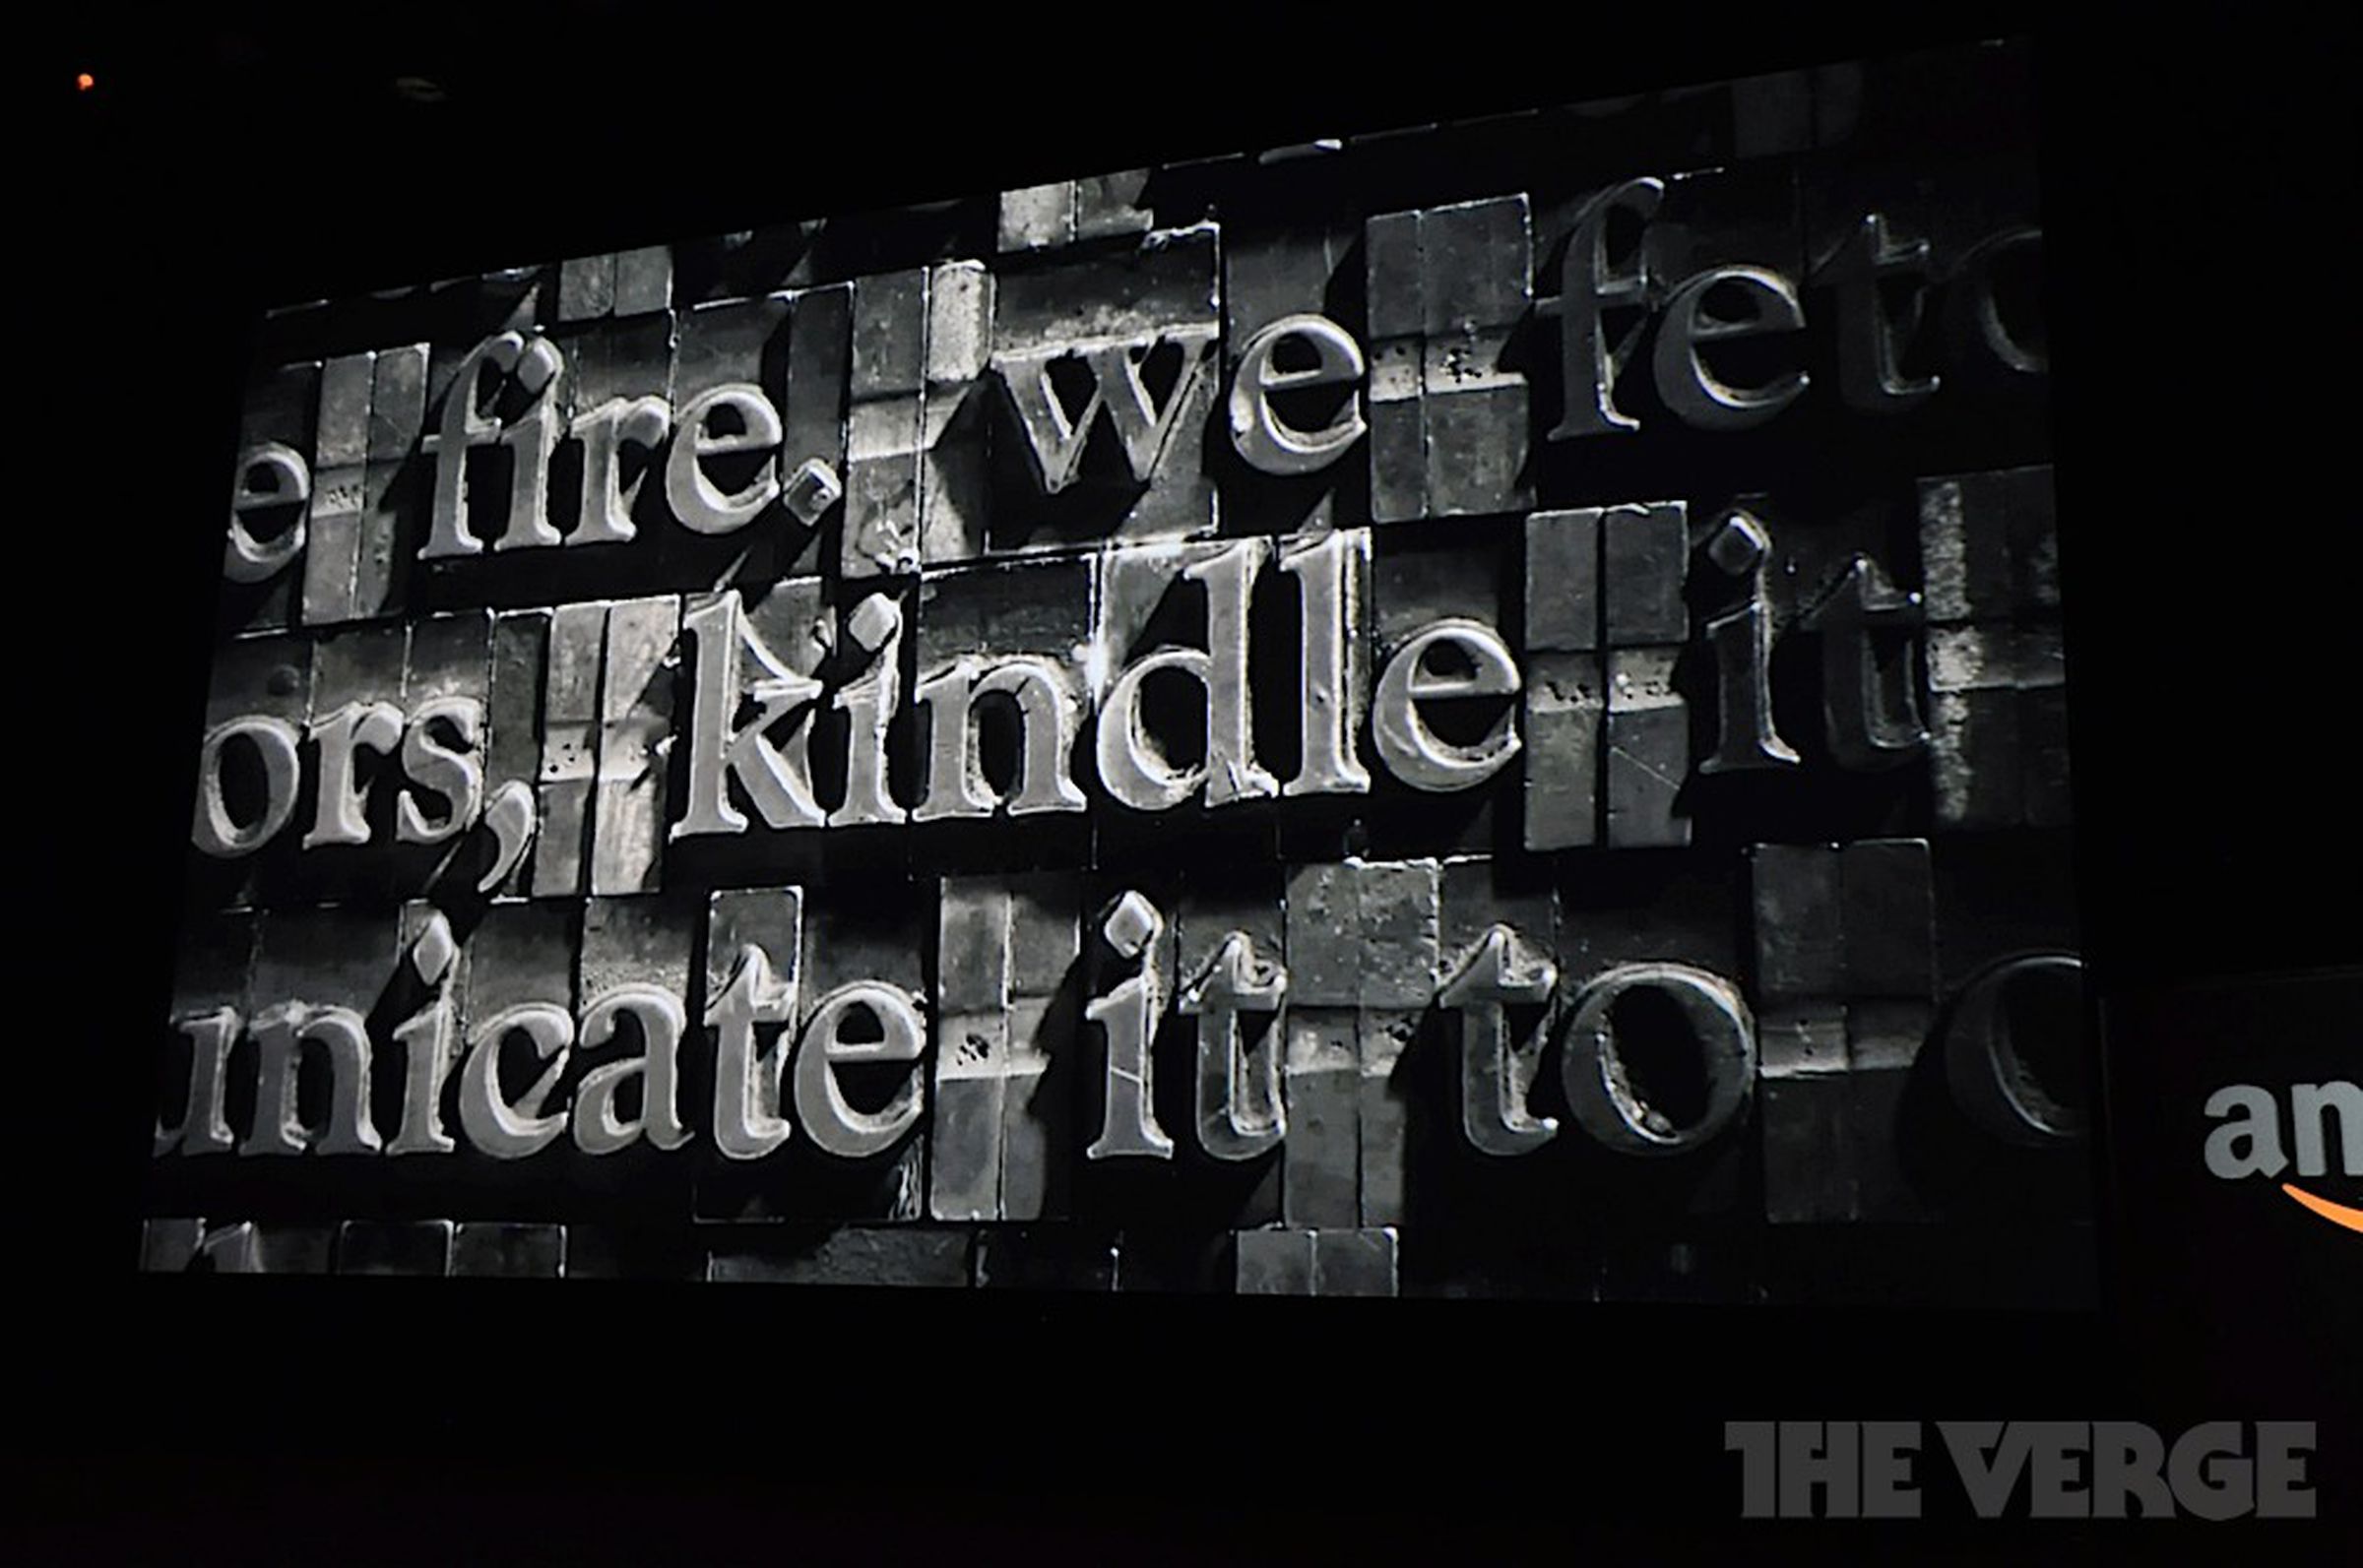 Amazon's Kindle Fire 2011 event, in pictures